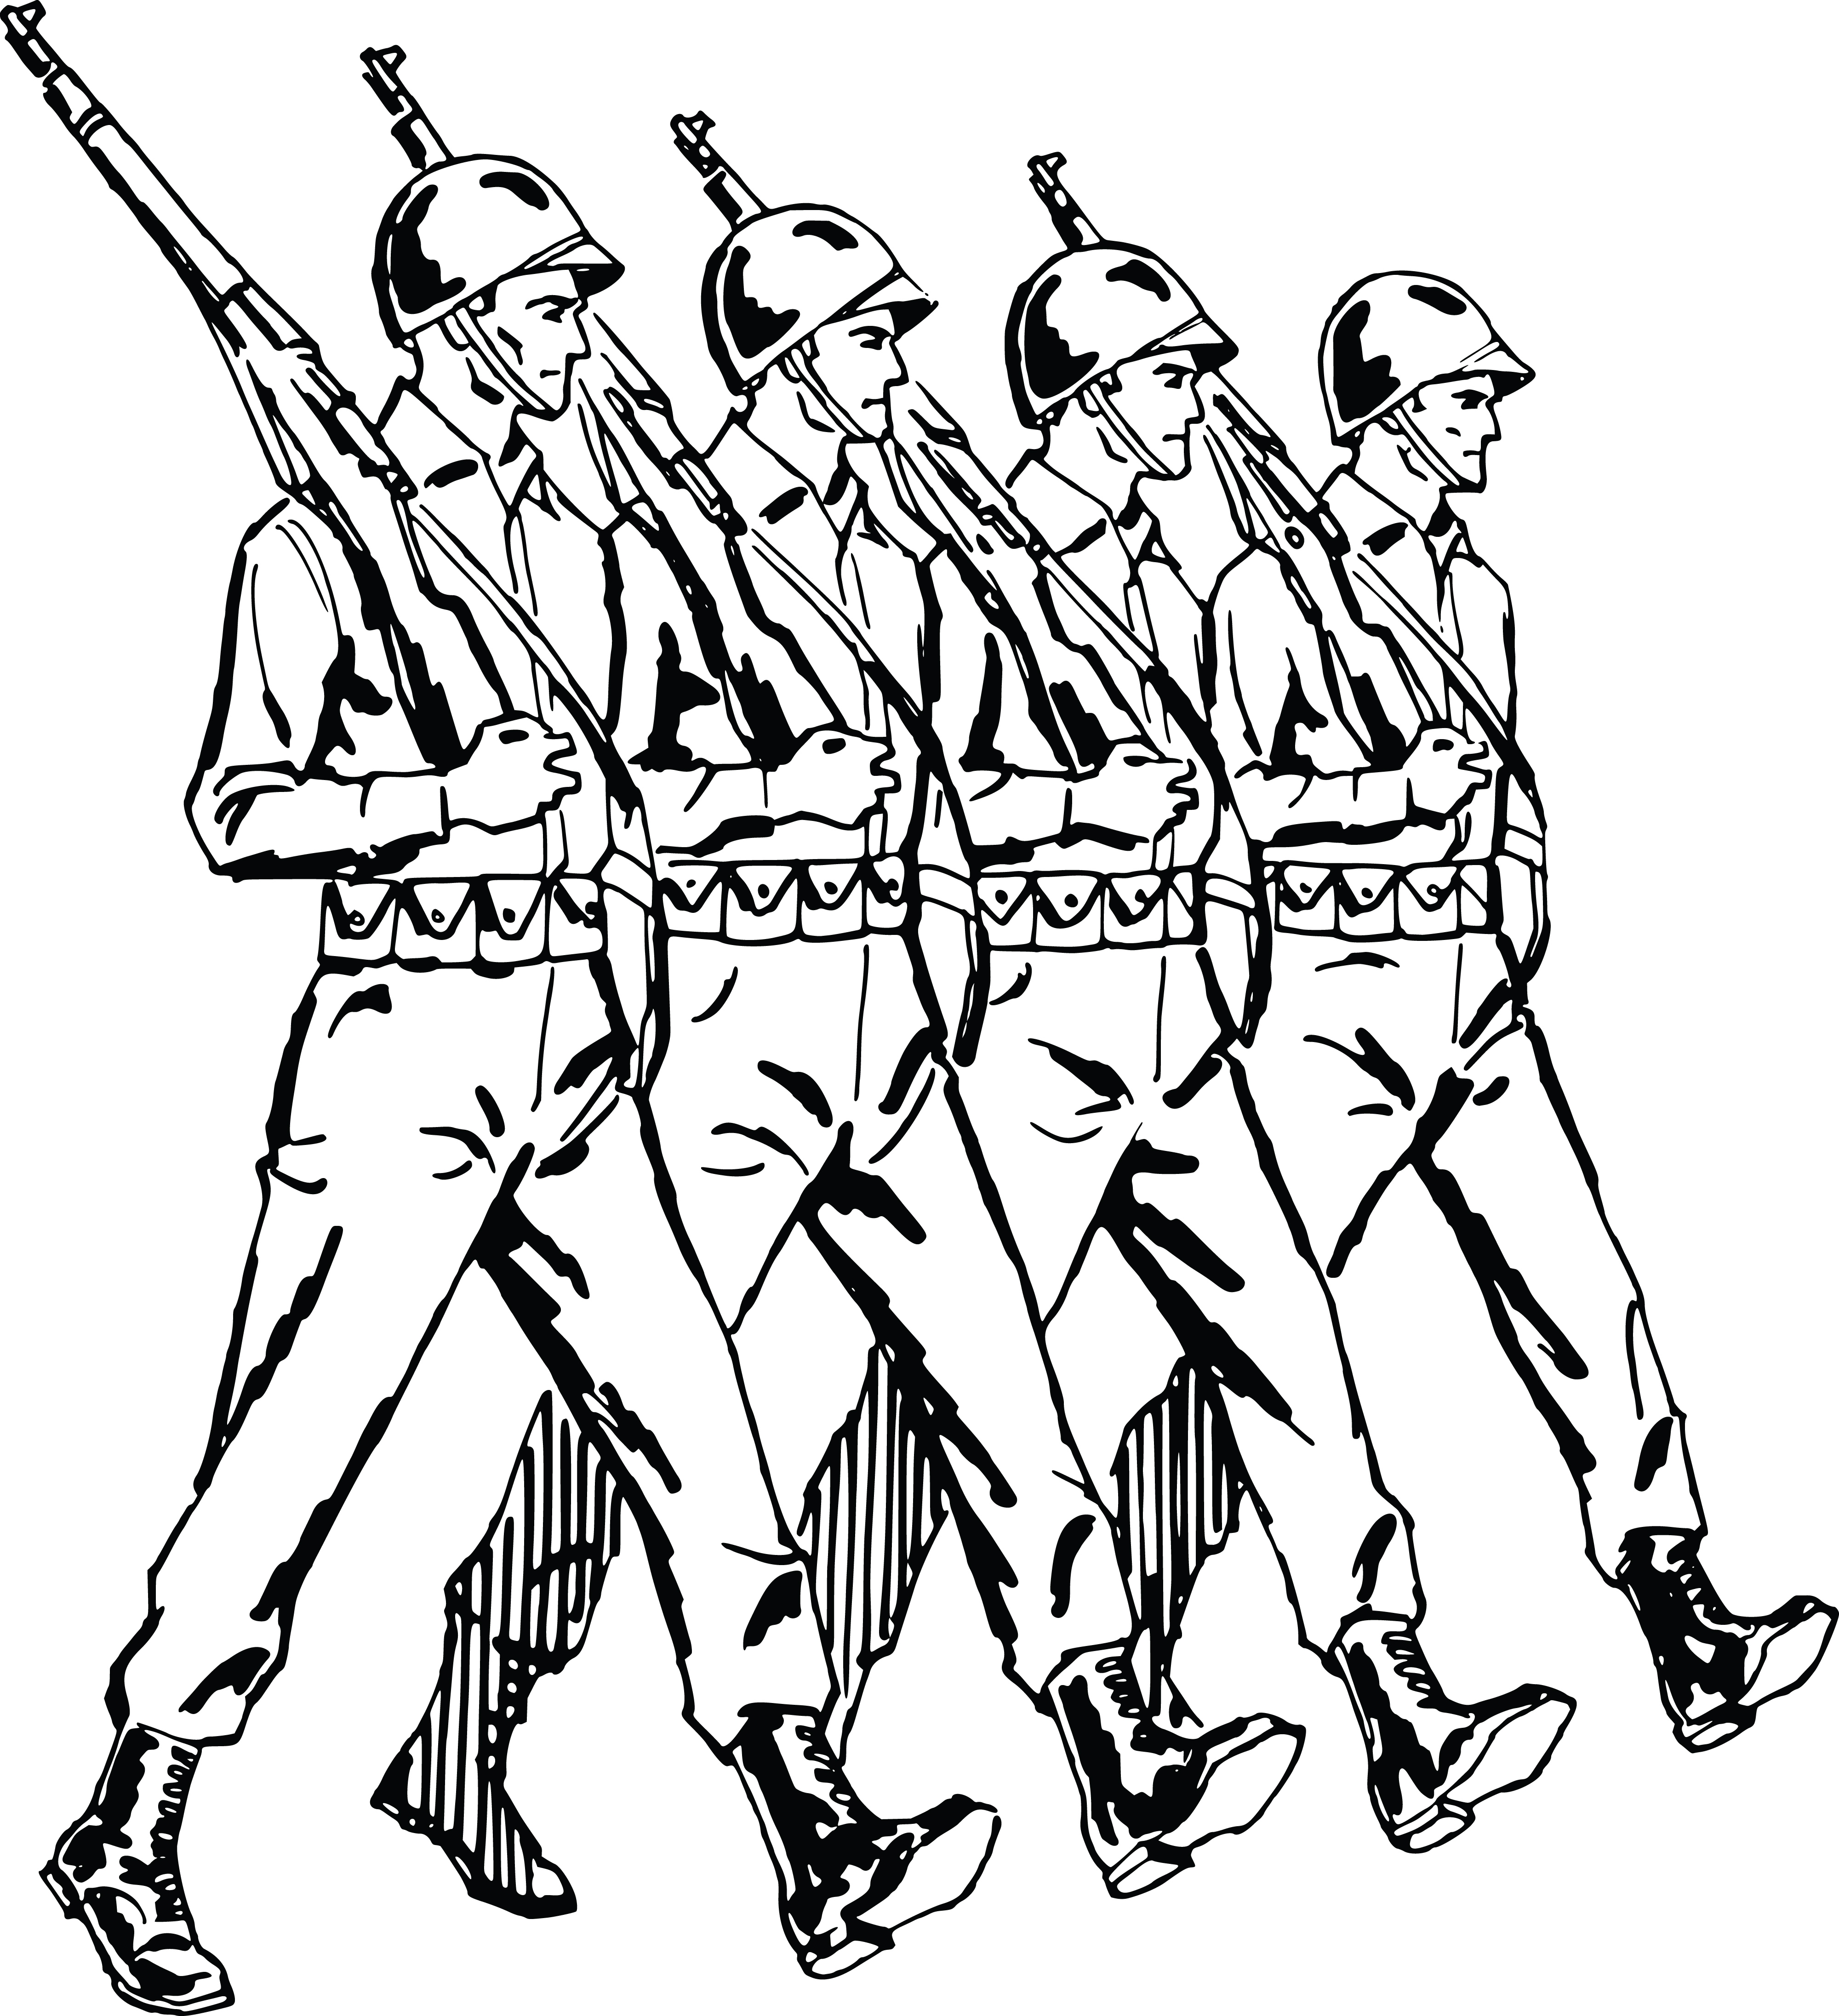 1300 Soldiers free clipart.